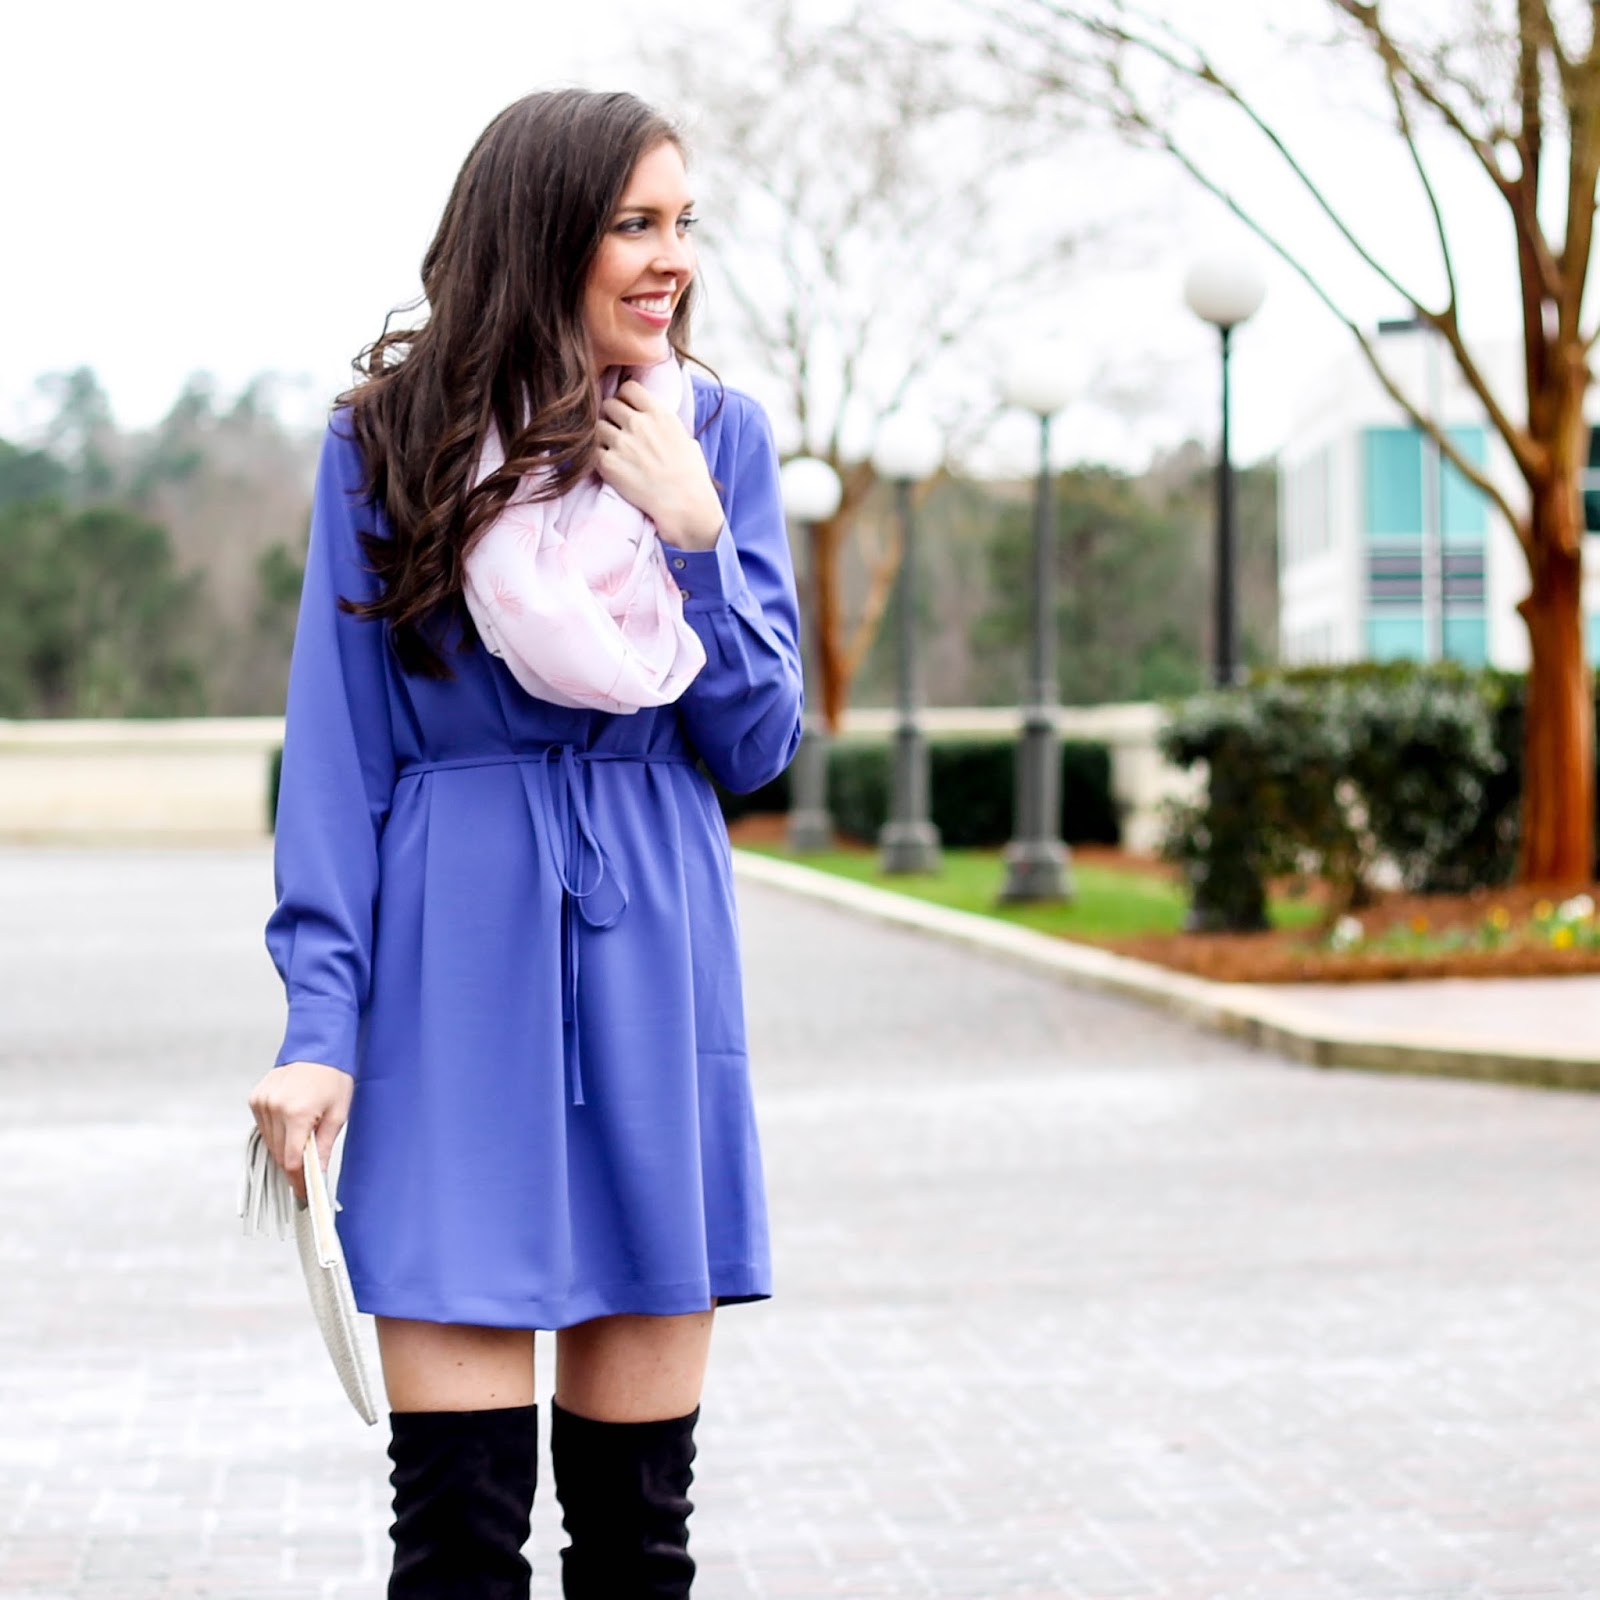 Purple Shirtdress, LOFT shirtdress, LOFT dress for winter and spring, work outfit ideas, winter outfit idea, winter trends, pastel scarf, nordstrom infinity scarf, black over the knee boots, suede boots, pretty in the pines, nc fashion blogger, fashion trends of 2016